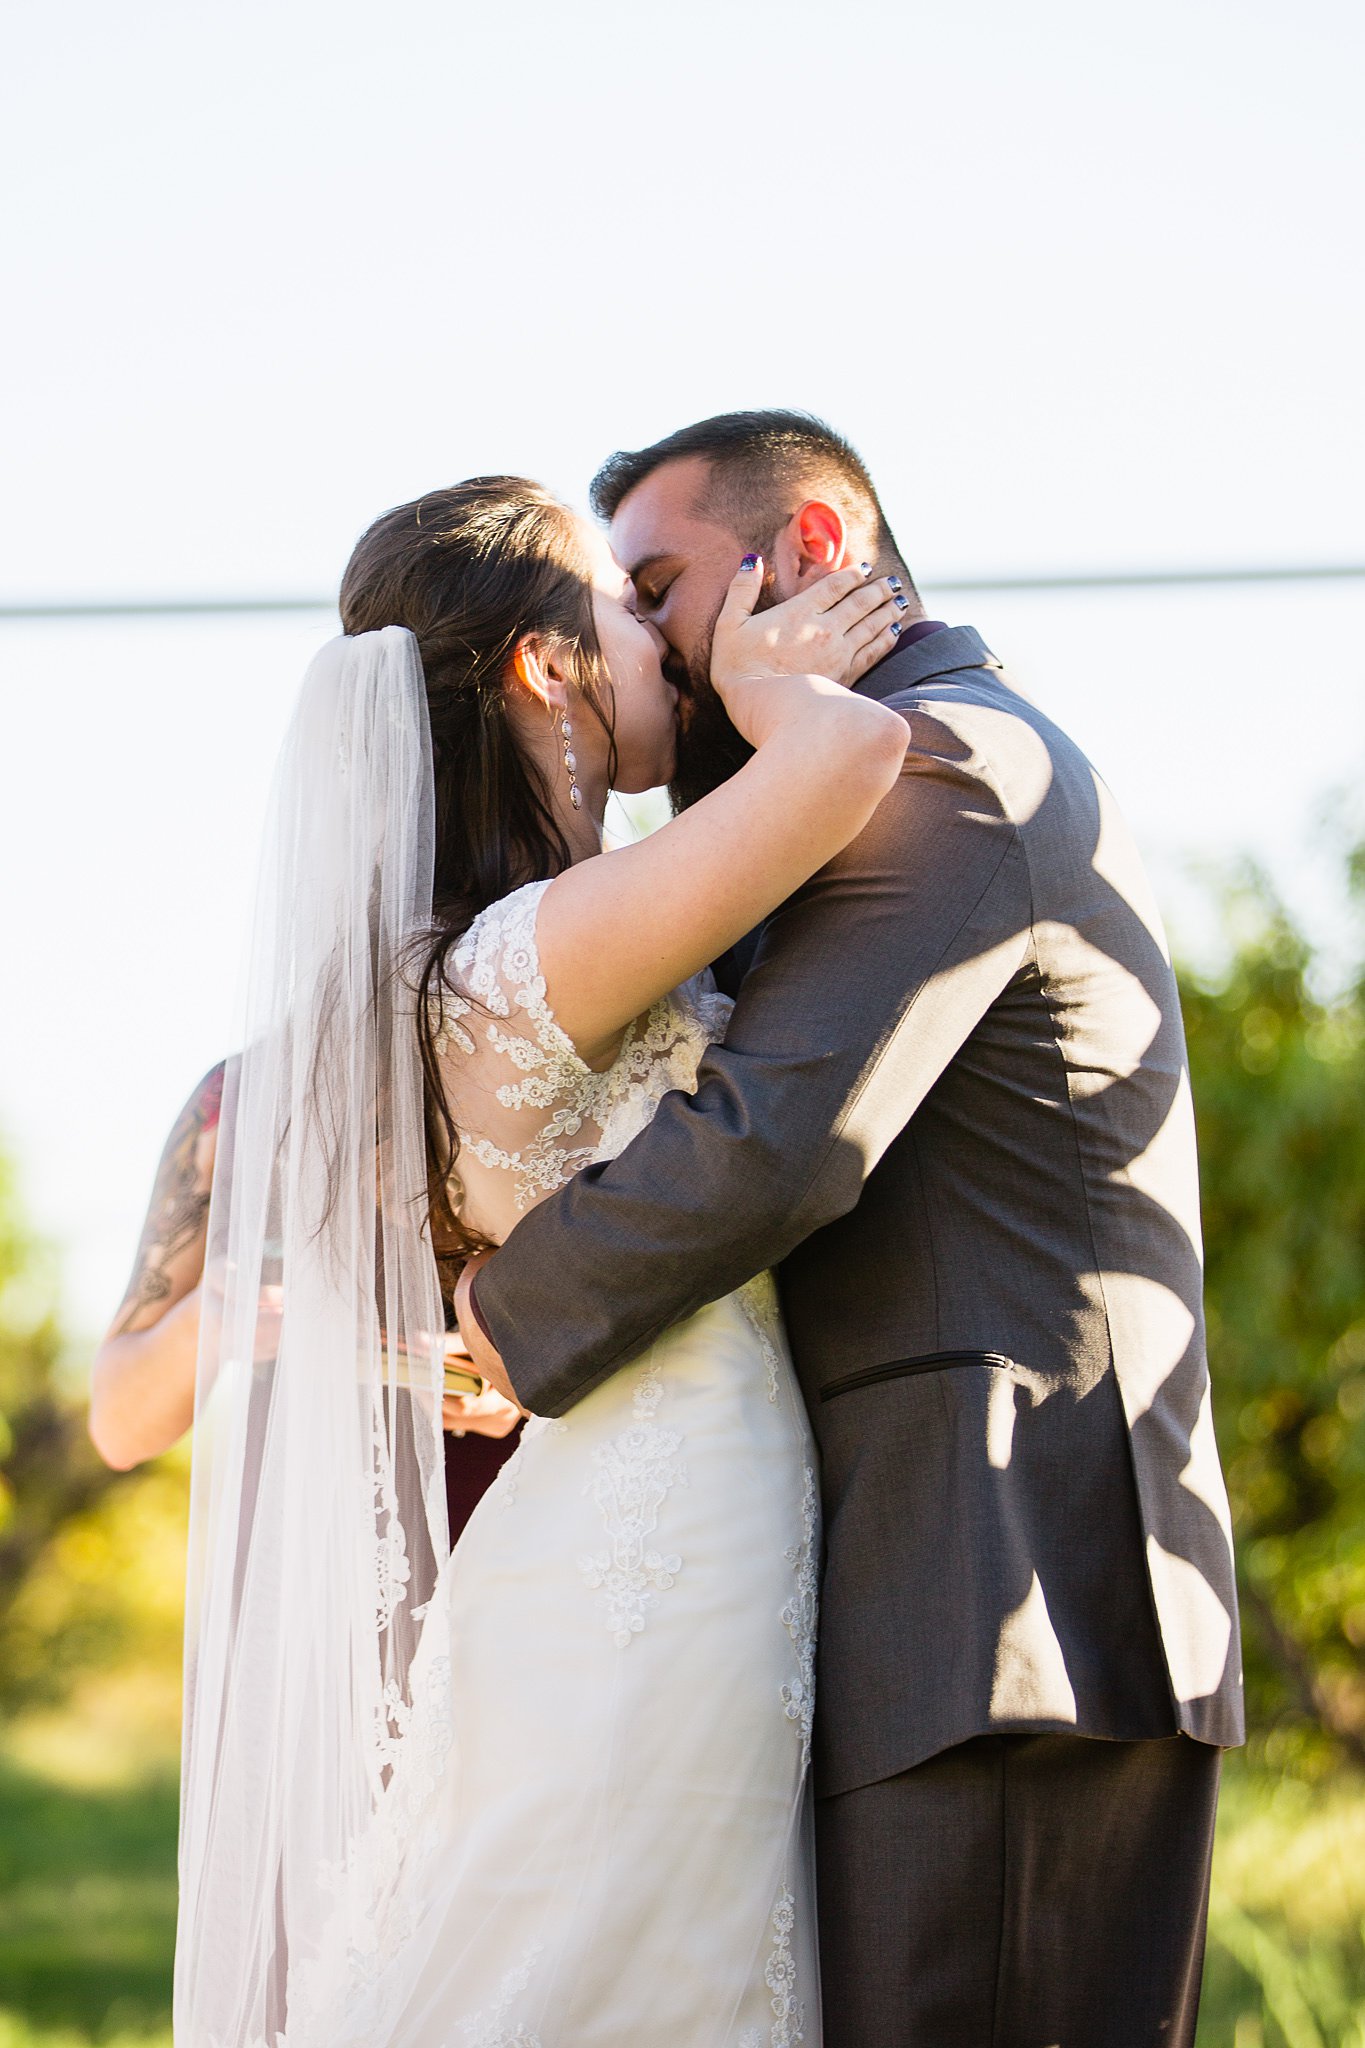 Bride and groom's first kiss at their Wedding ceremony at the Schnepf Farm's Farmhouse by Arizona wedding photographer PMA Photography.